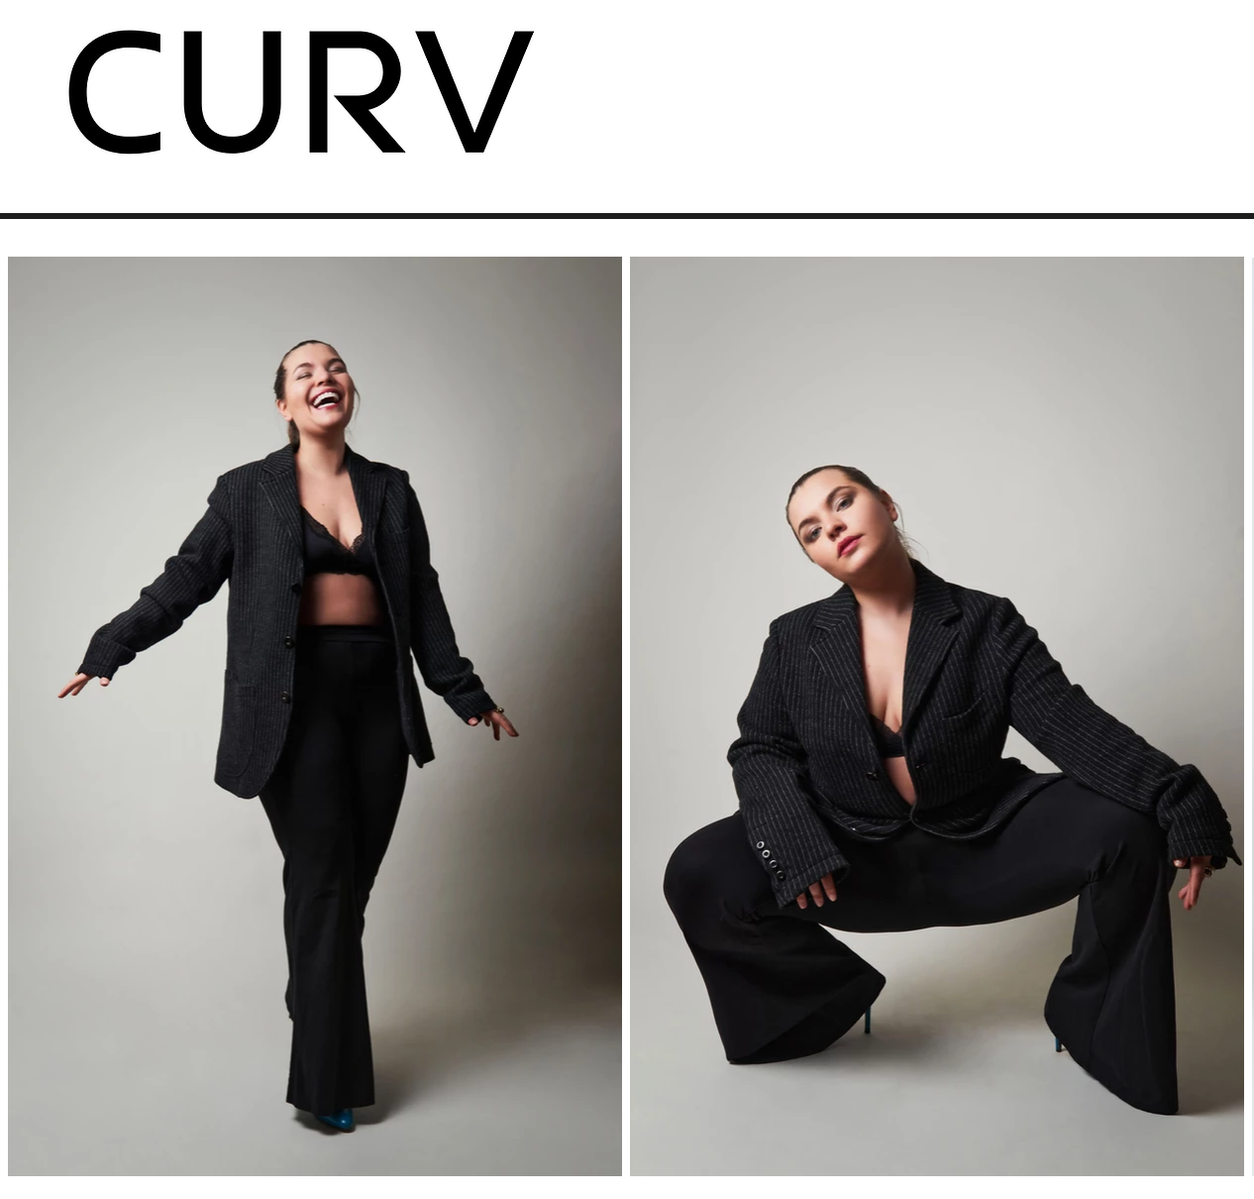 Victoria Pousada Kreindler's profile on Curv Management NY (an agency dedicated to the development of Curve Models based in New York).